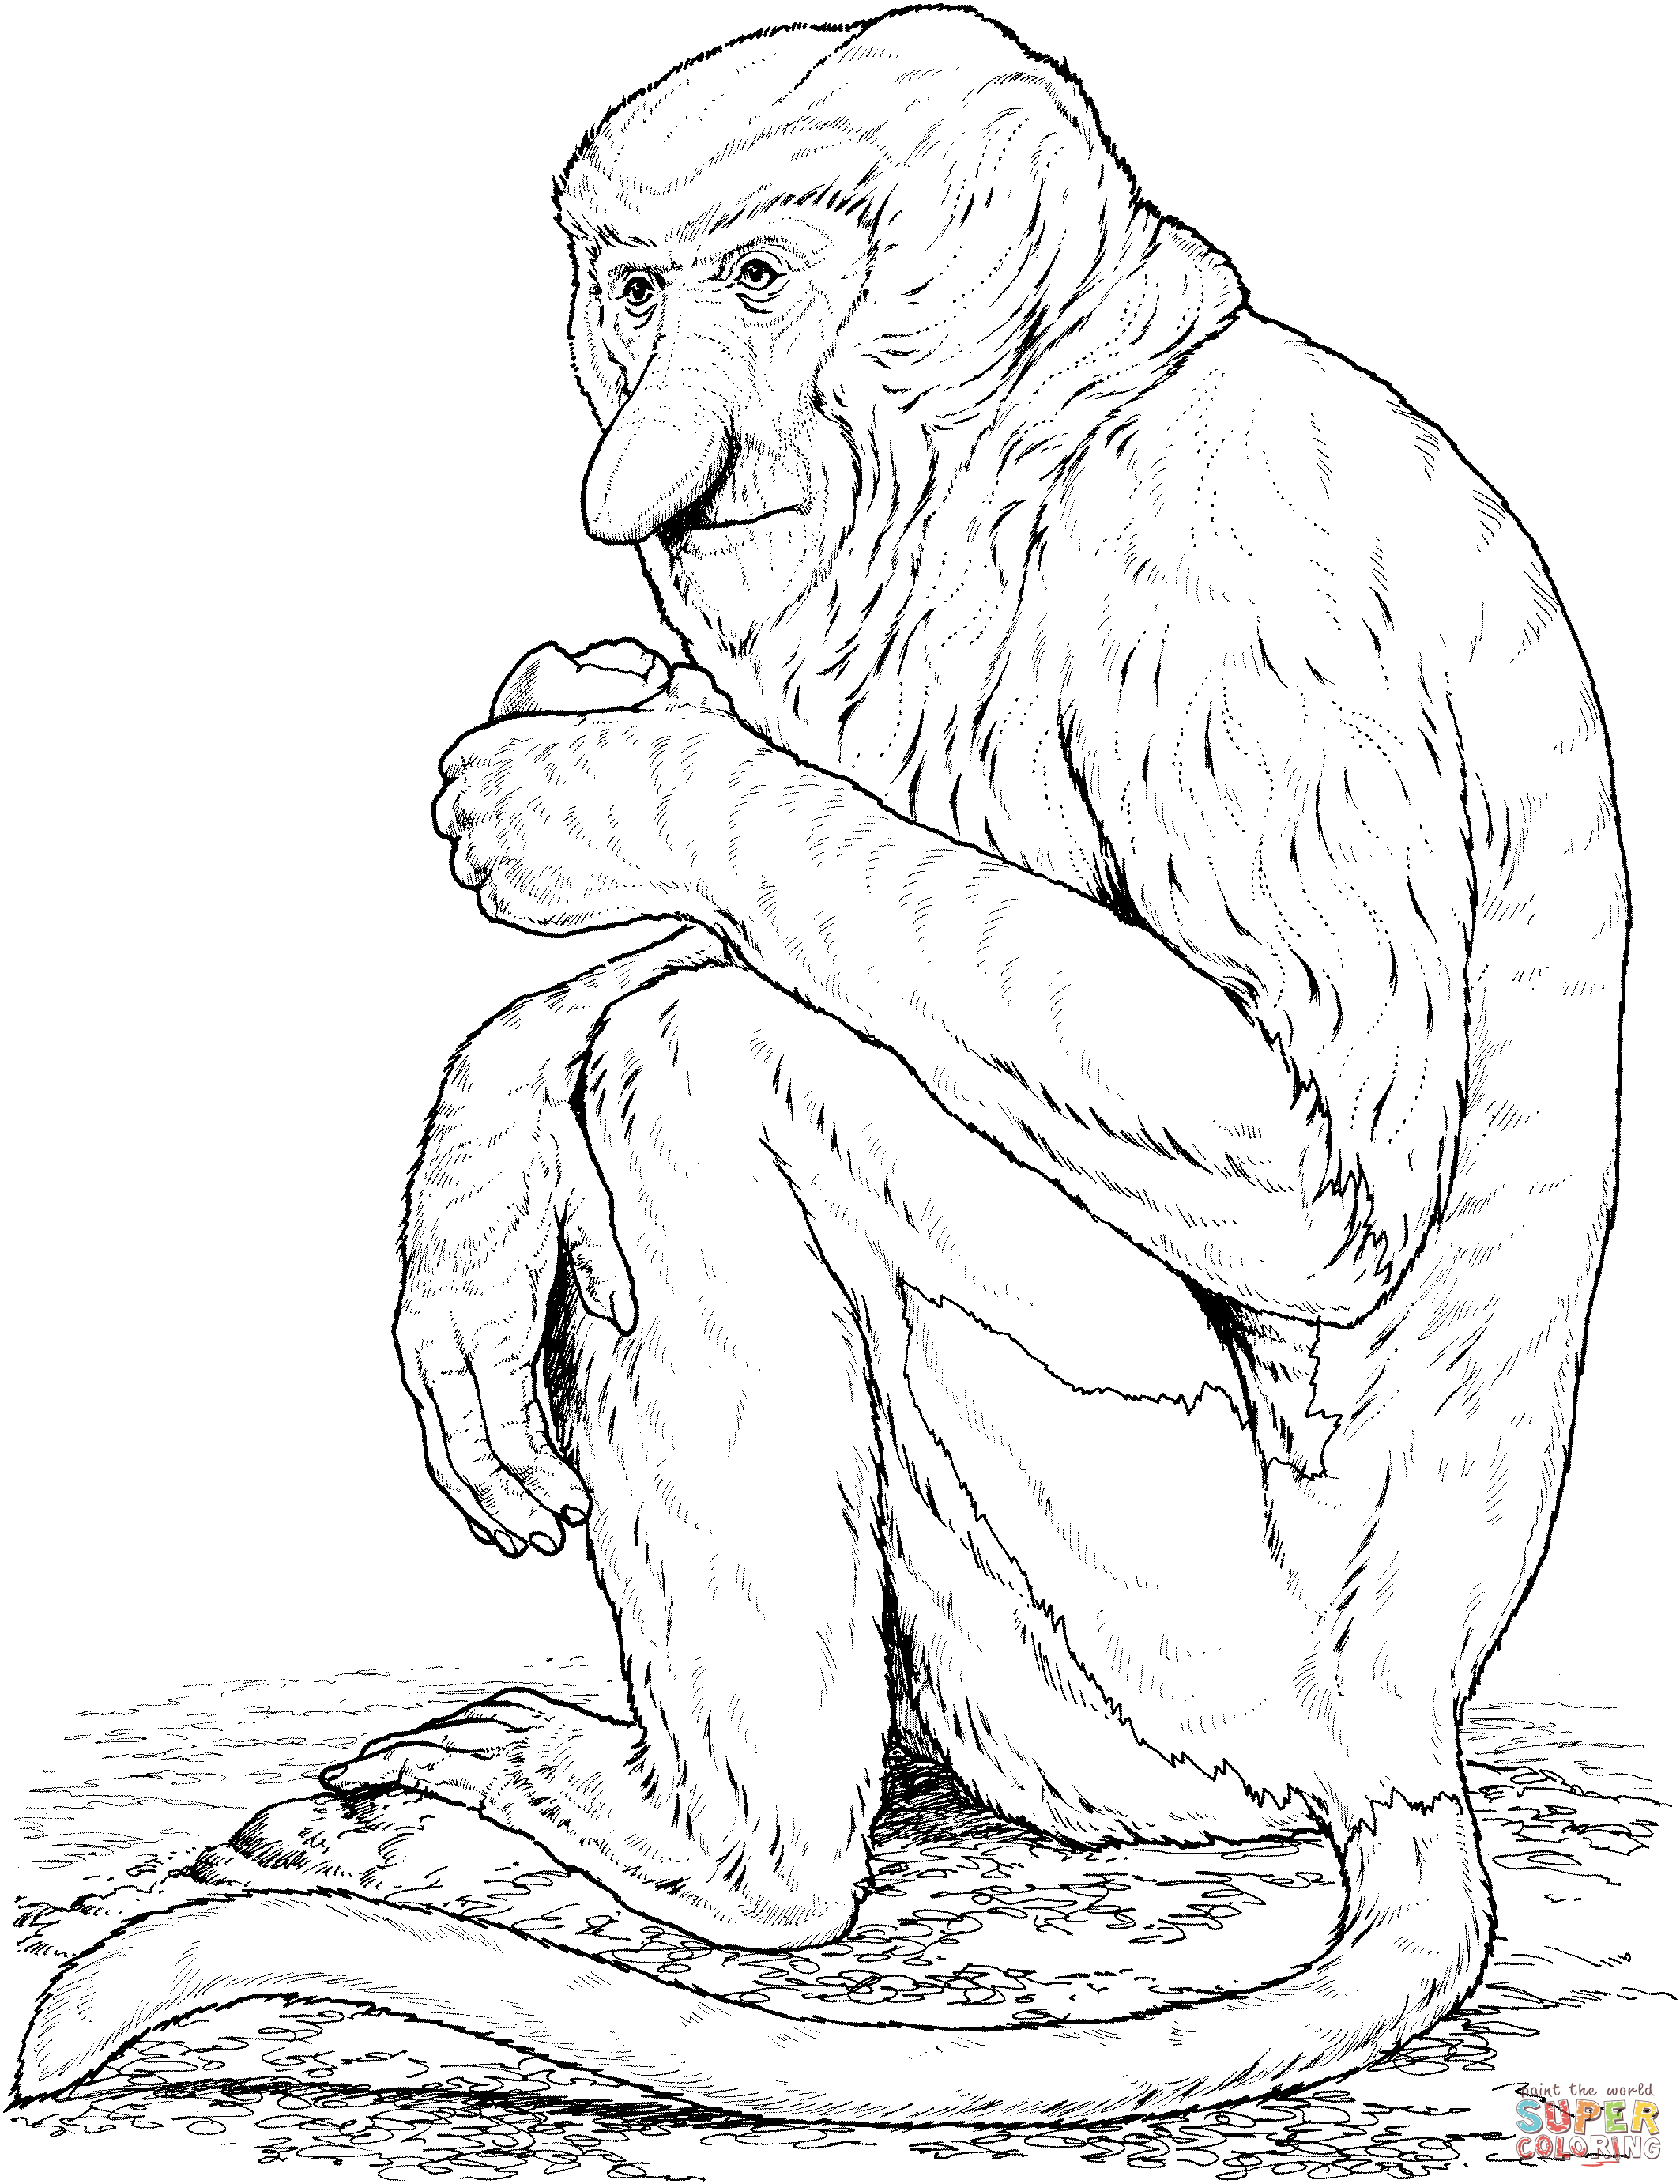 Proboscis Monkey coloring page | Free Printable Coloring Pages